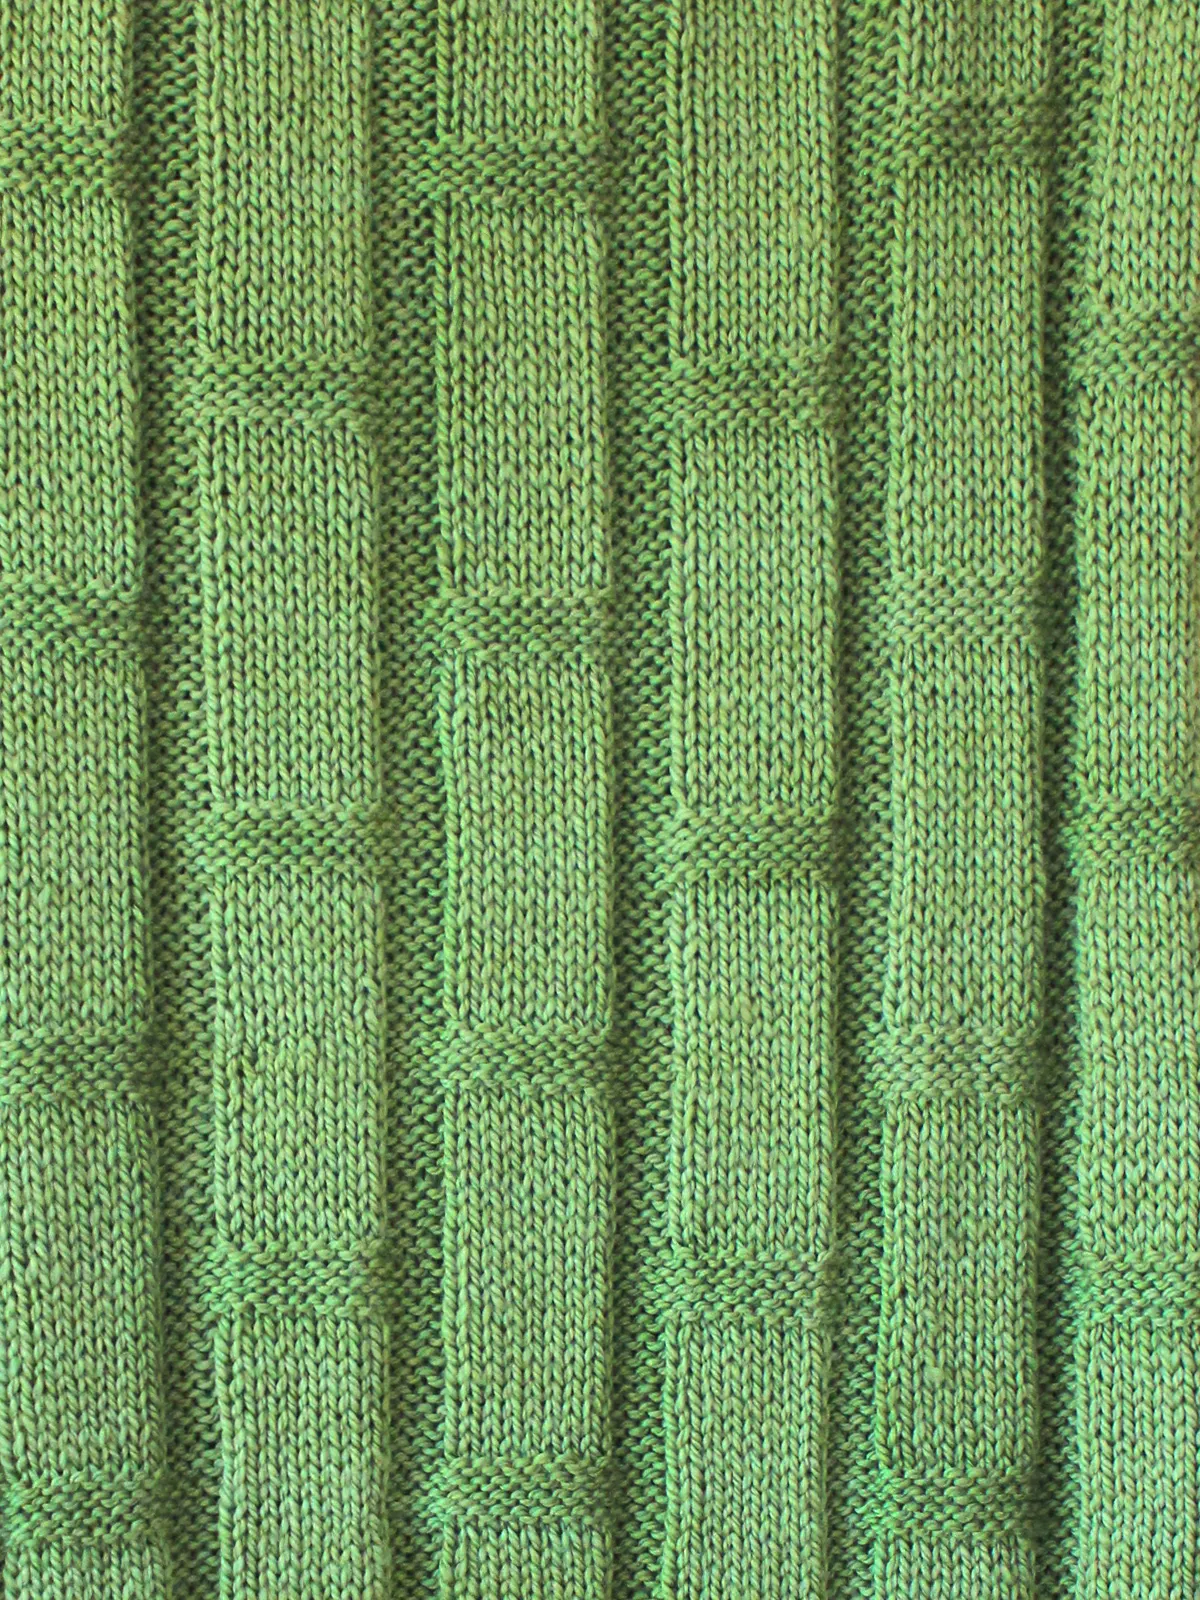 Knitted bamboo stitch with green yarn in large blanket pattern by Studio Knit.